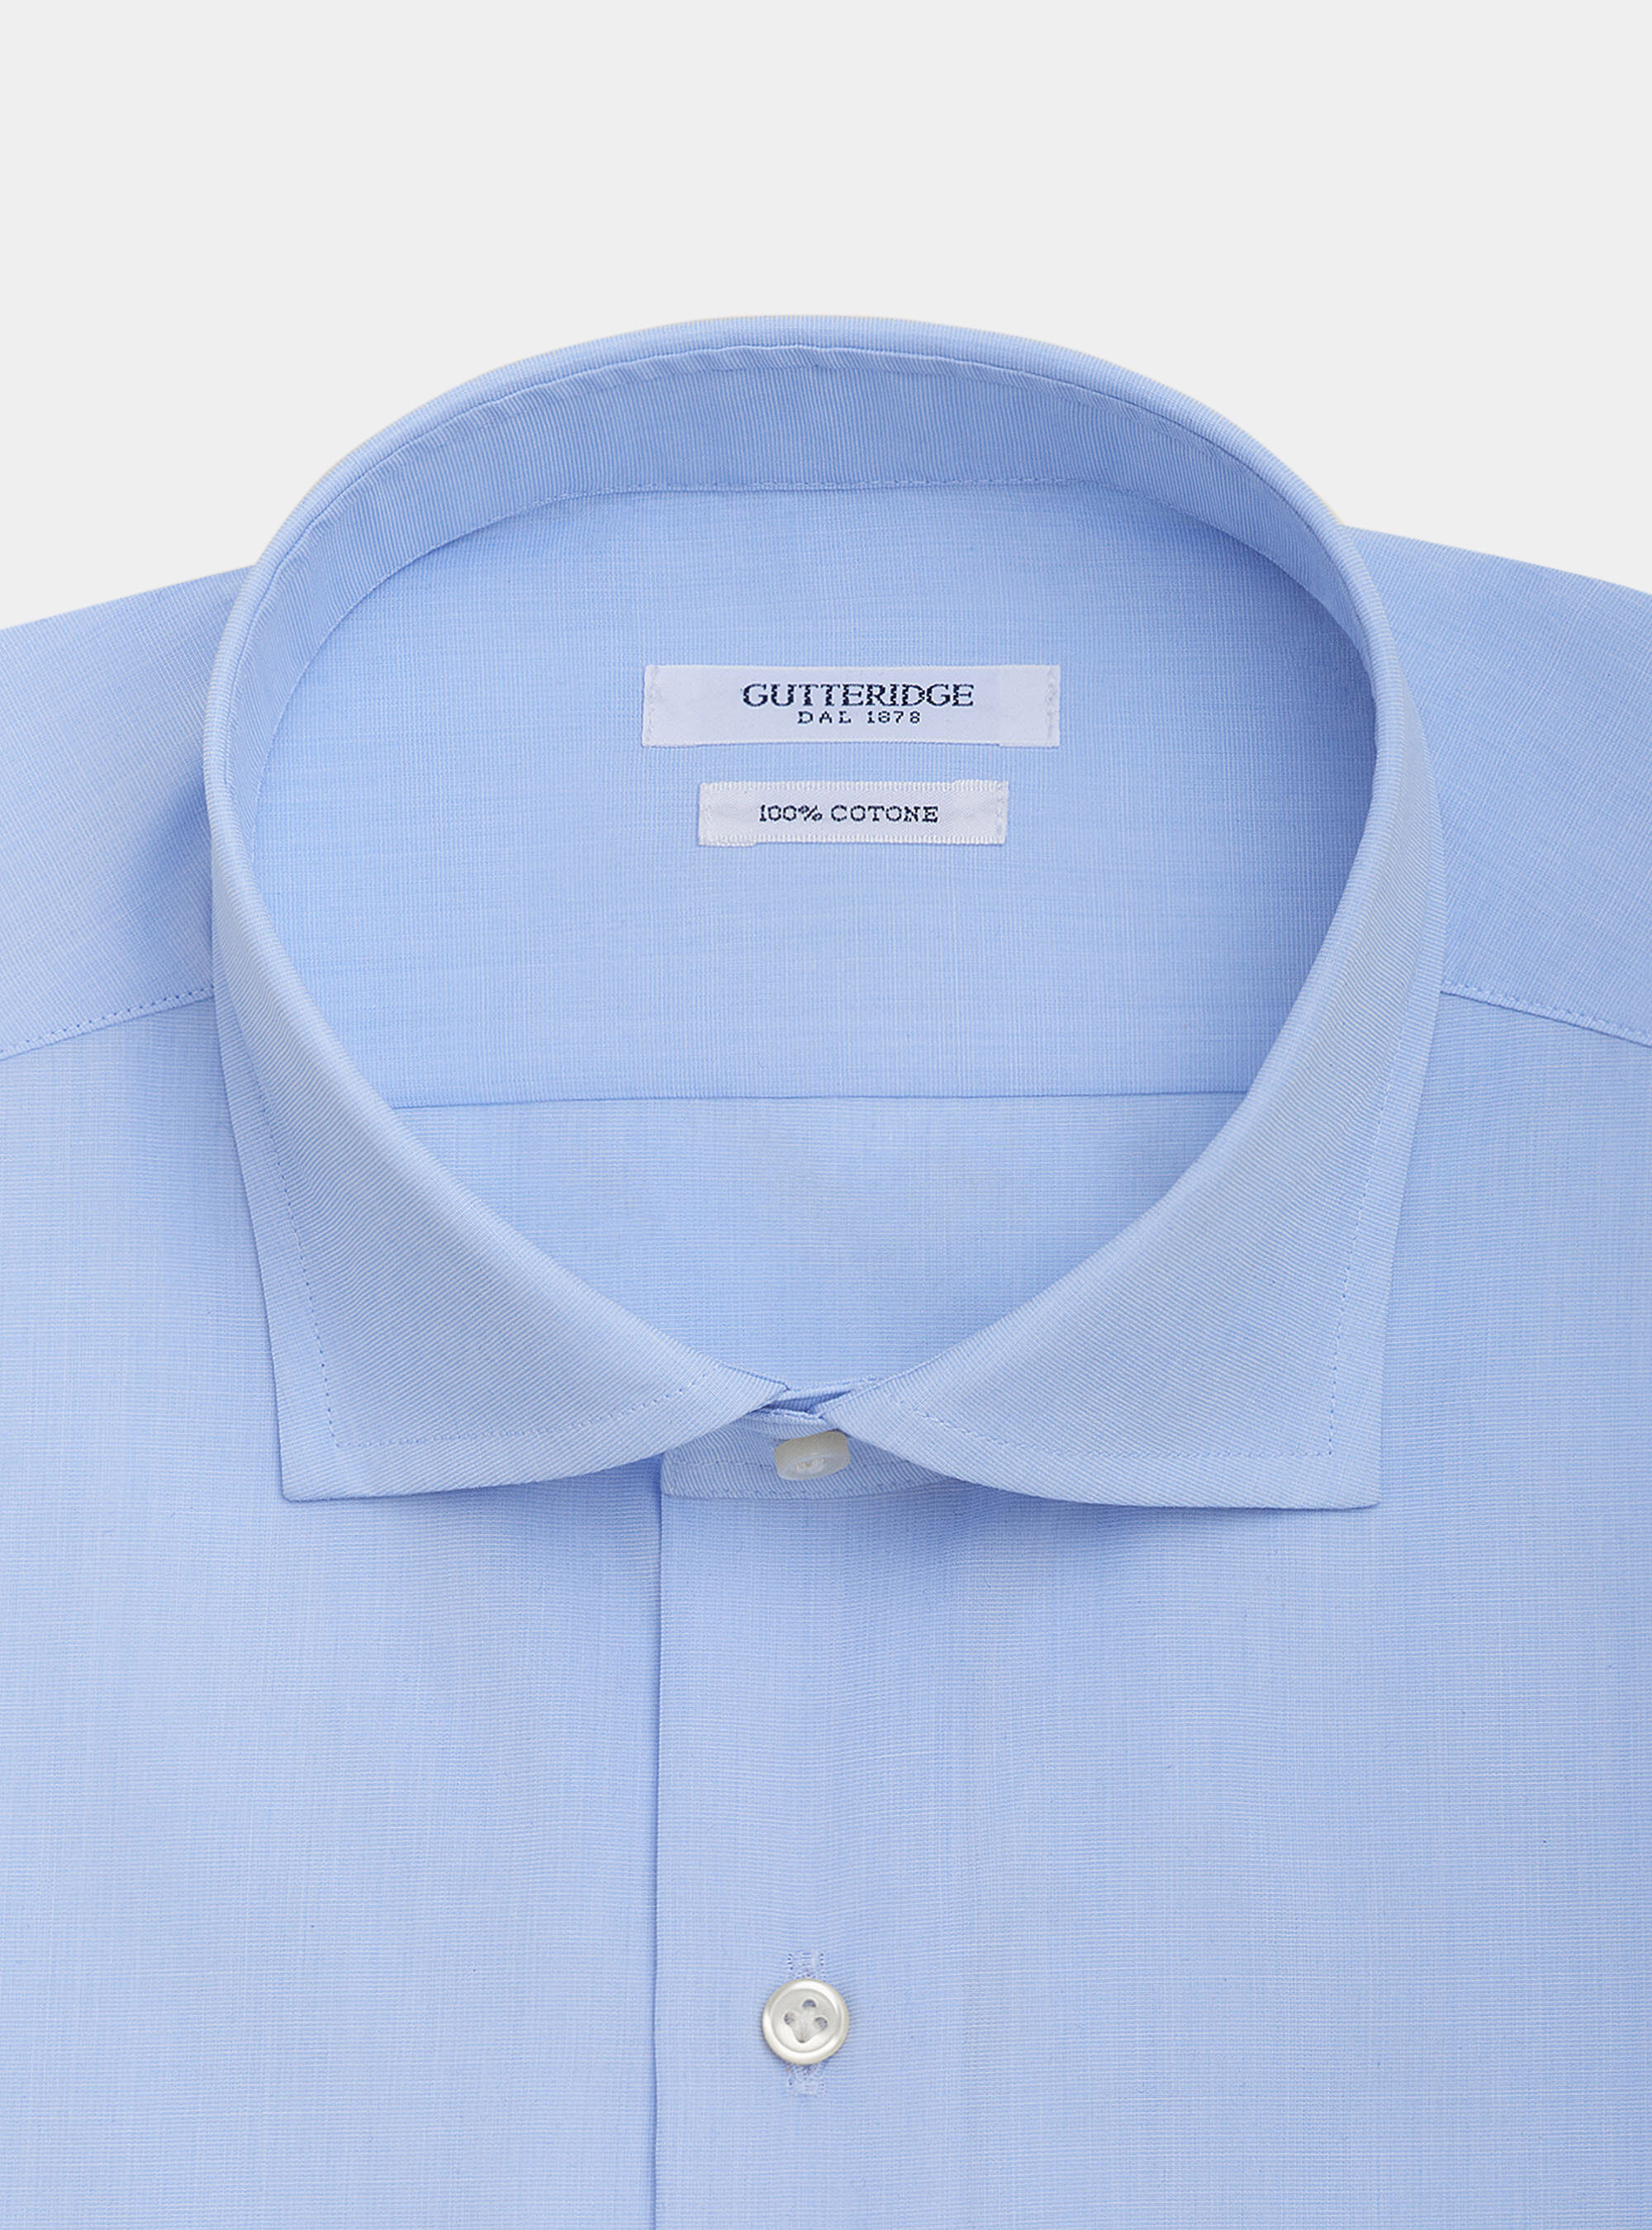 dry fit collar shirts